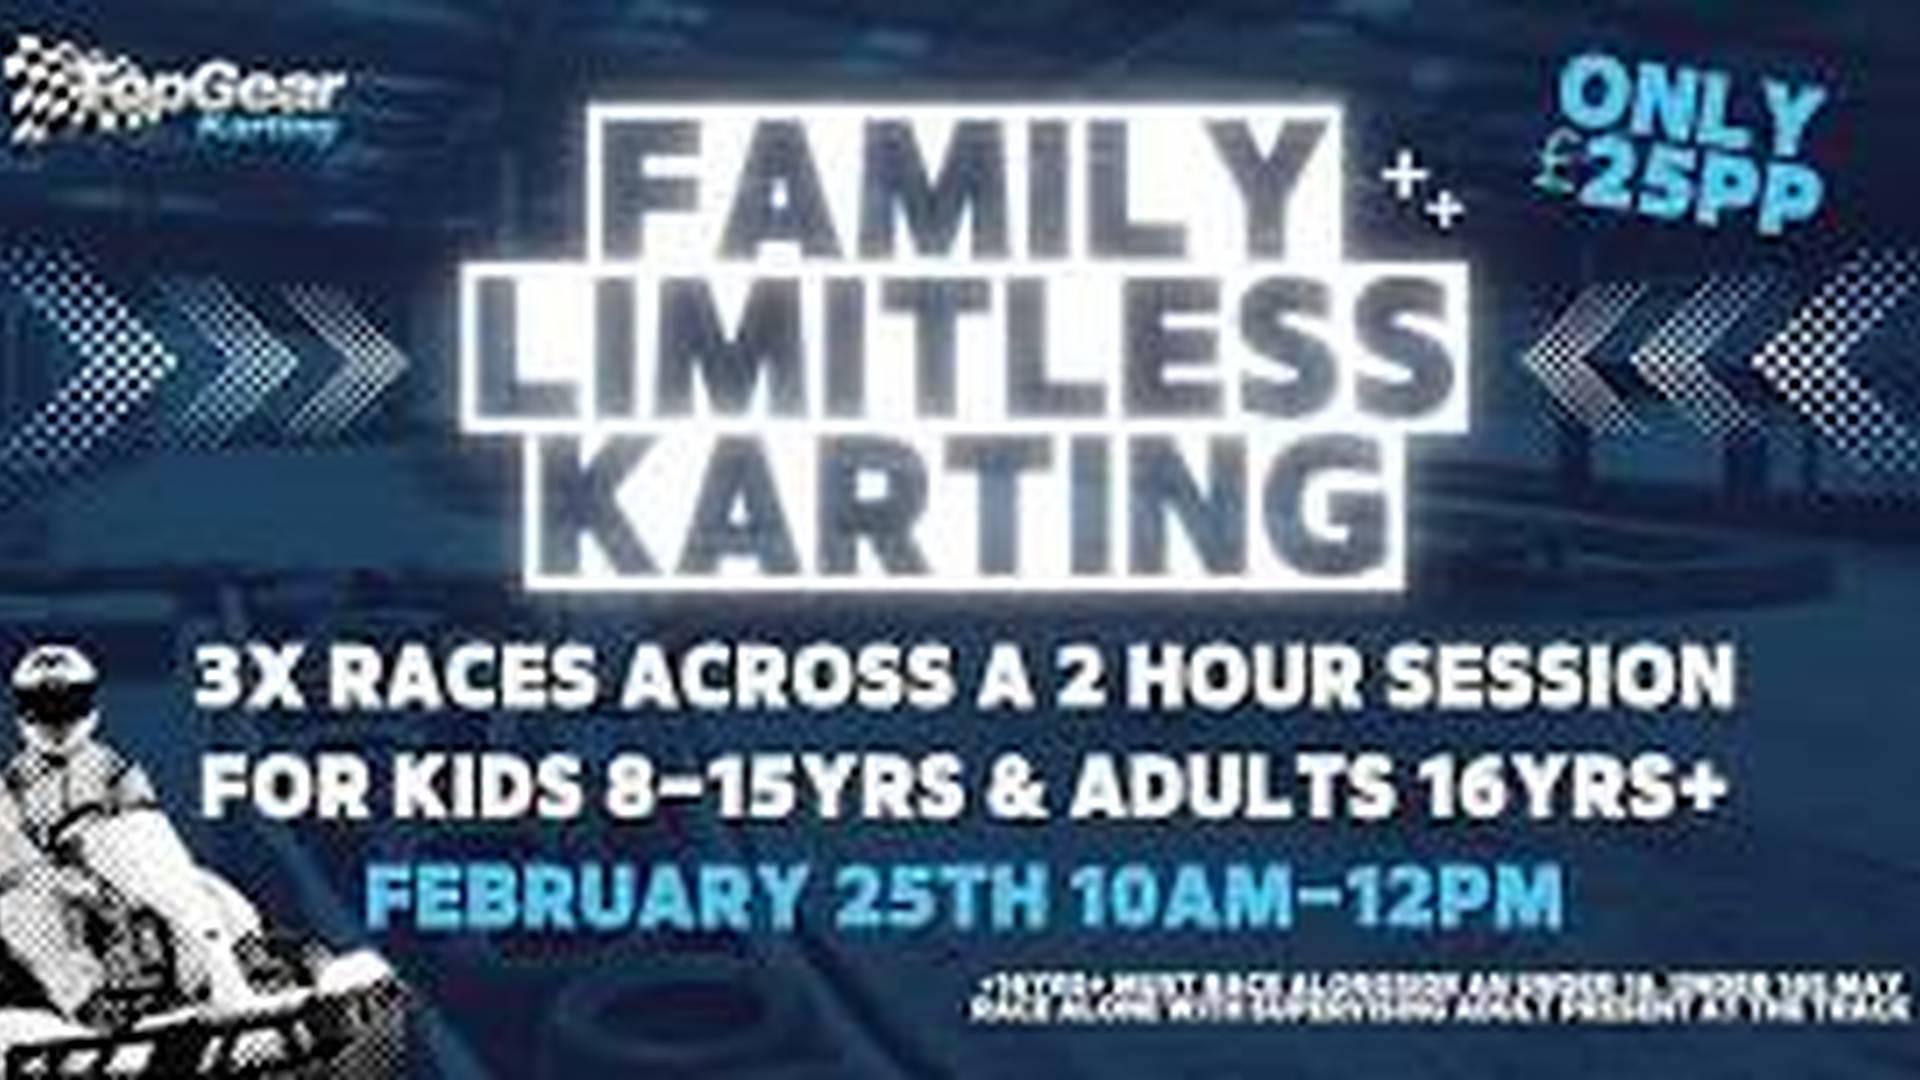 Family Limitless Karting: 3x Races for Just £25pp @ TopGear Karting (For Kids 8yrs+ & Guardians) photo